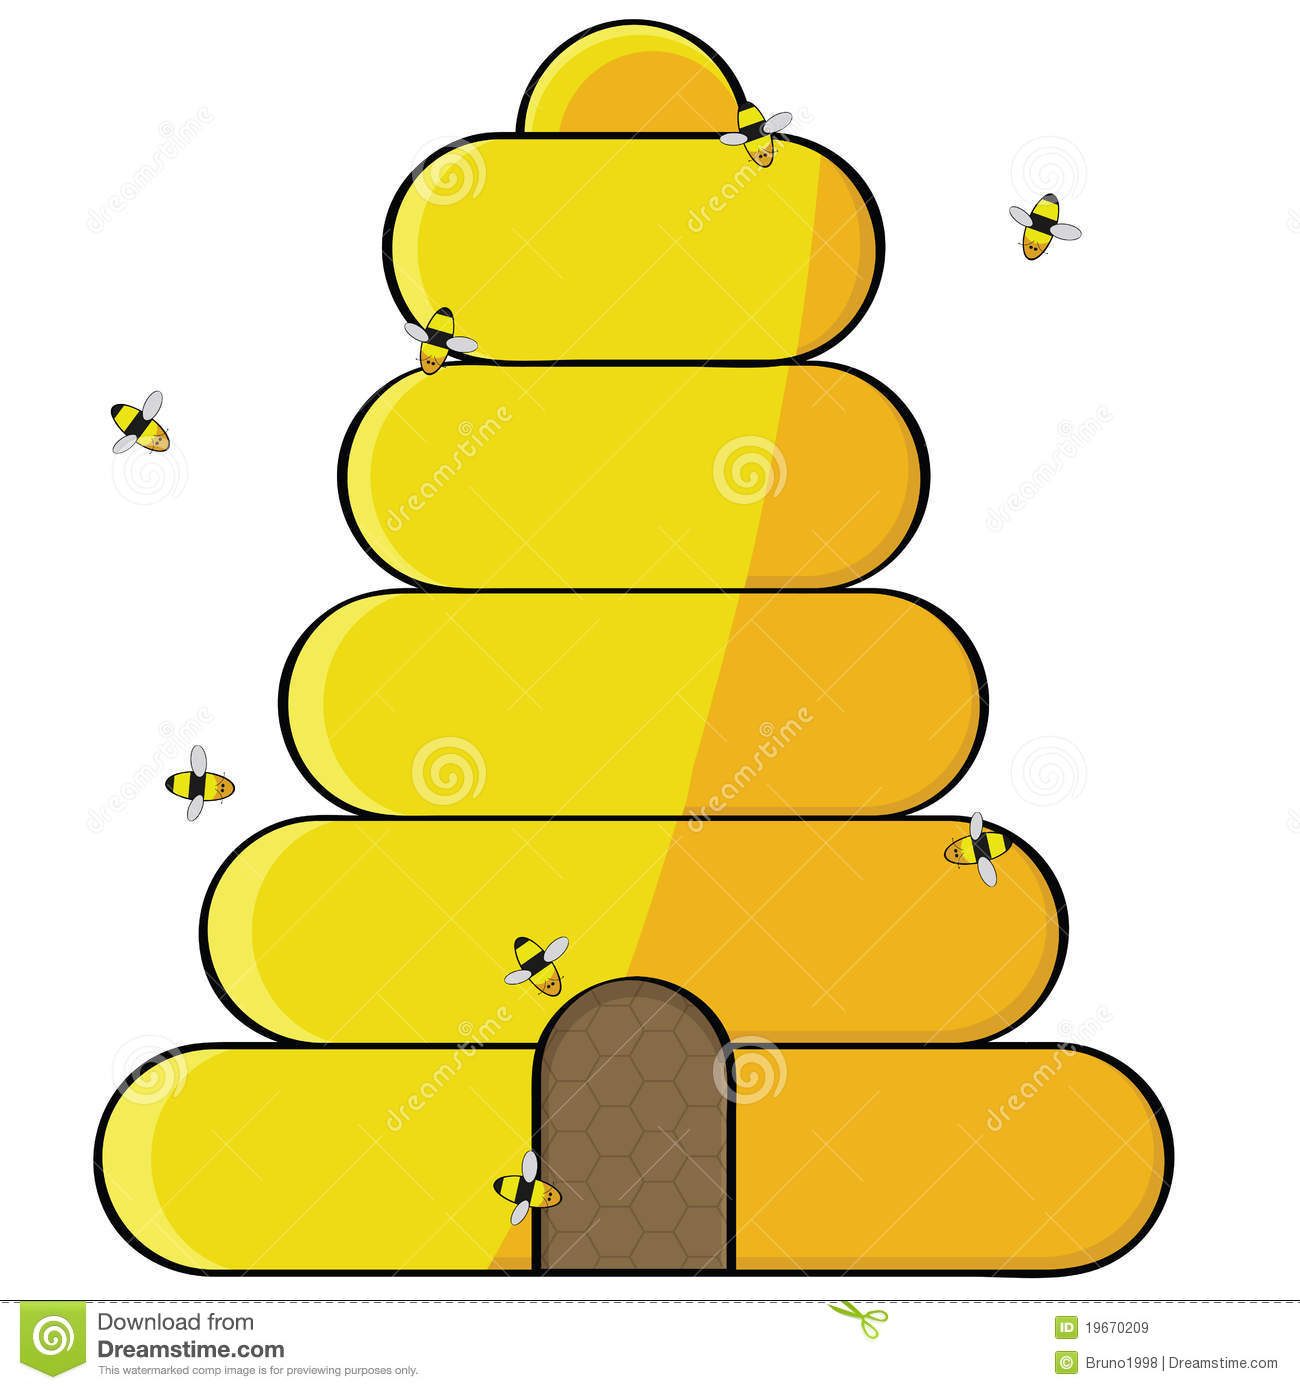 Illustration Showing Bees Flying Towards The Opening Of A Beehive